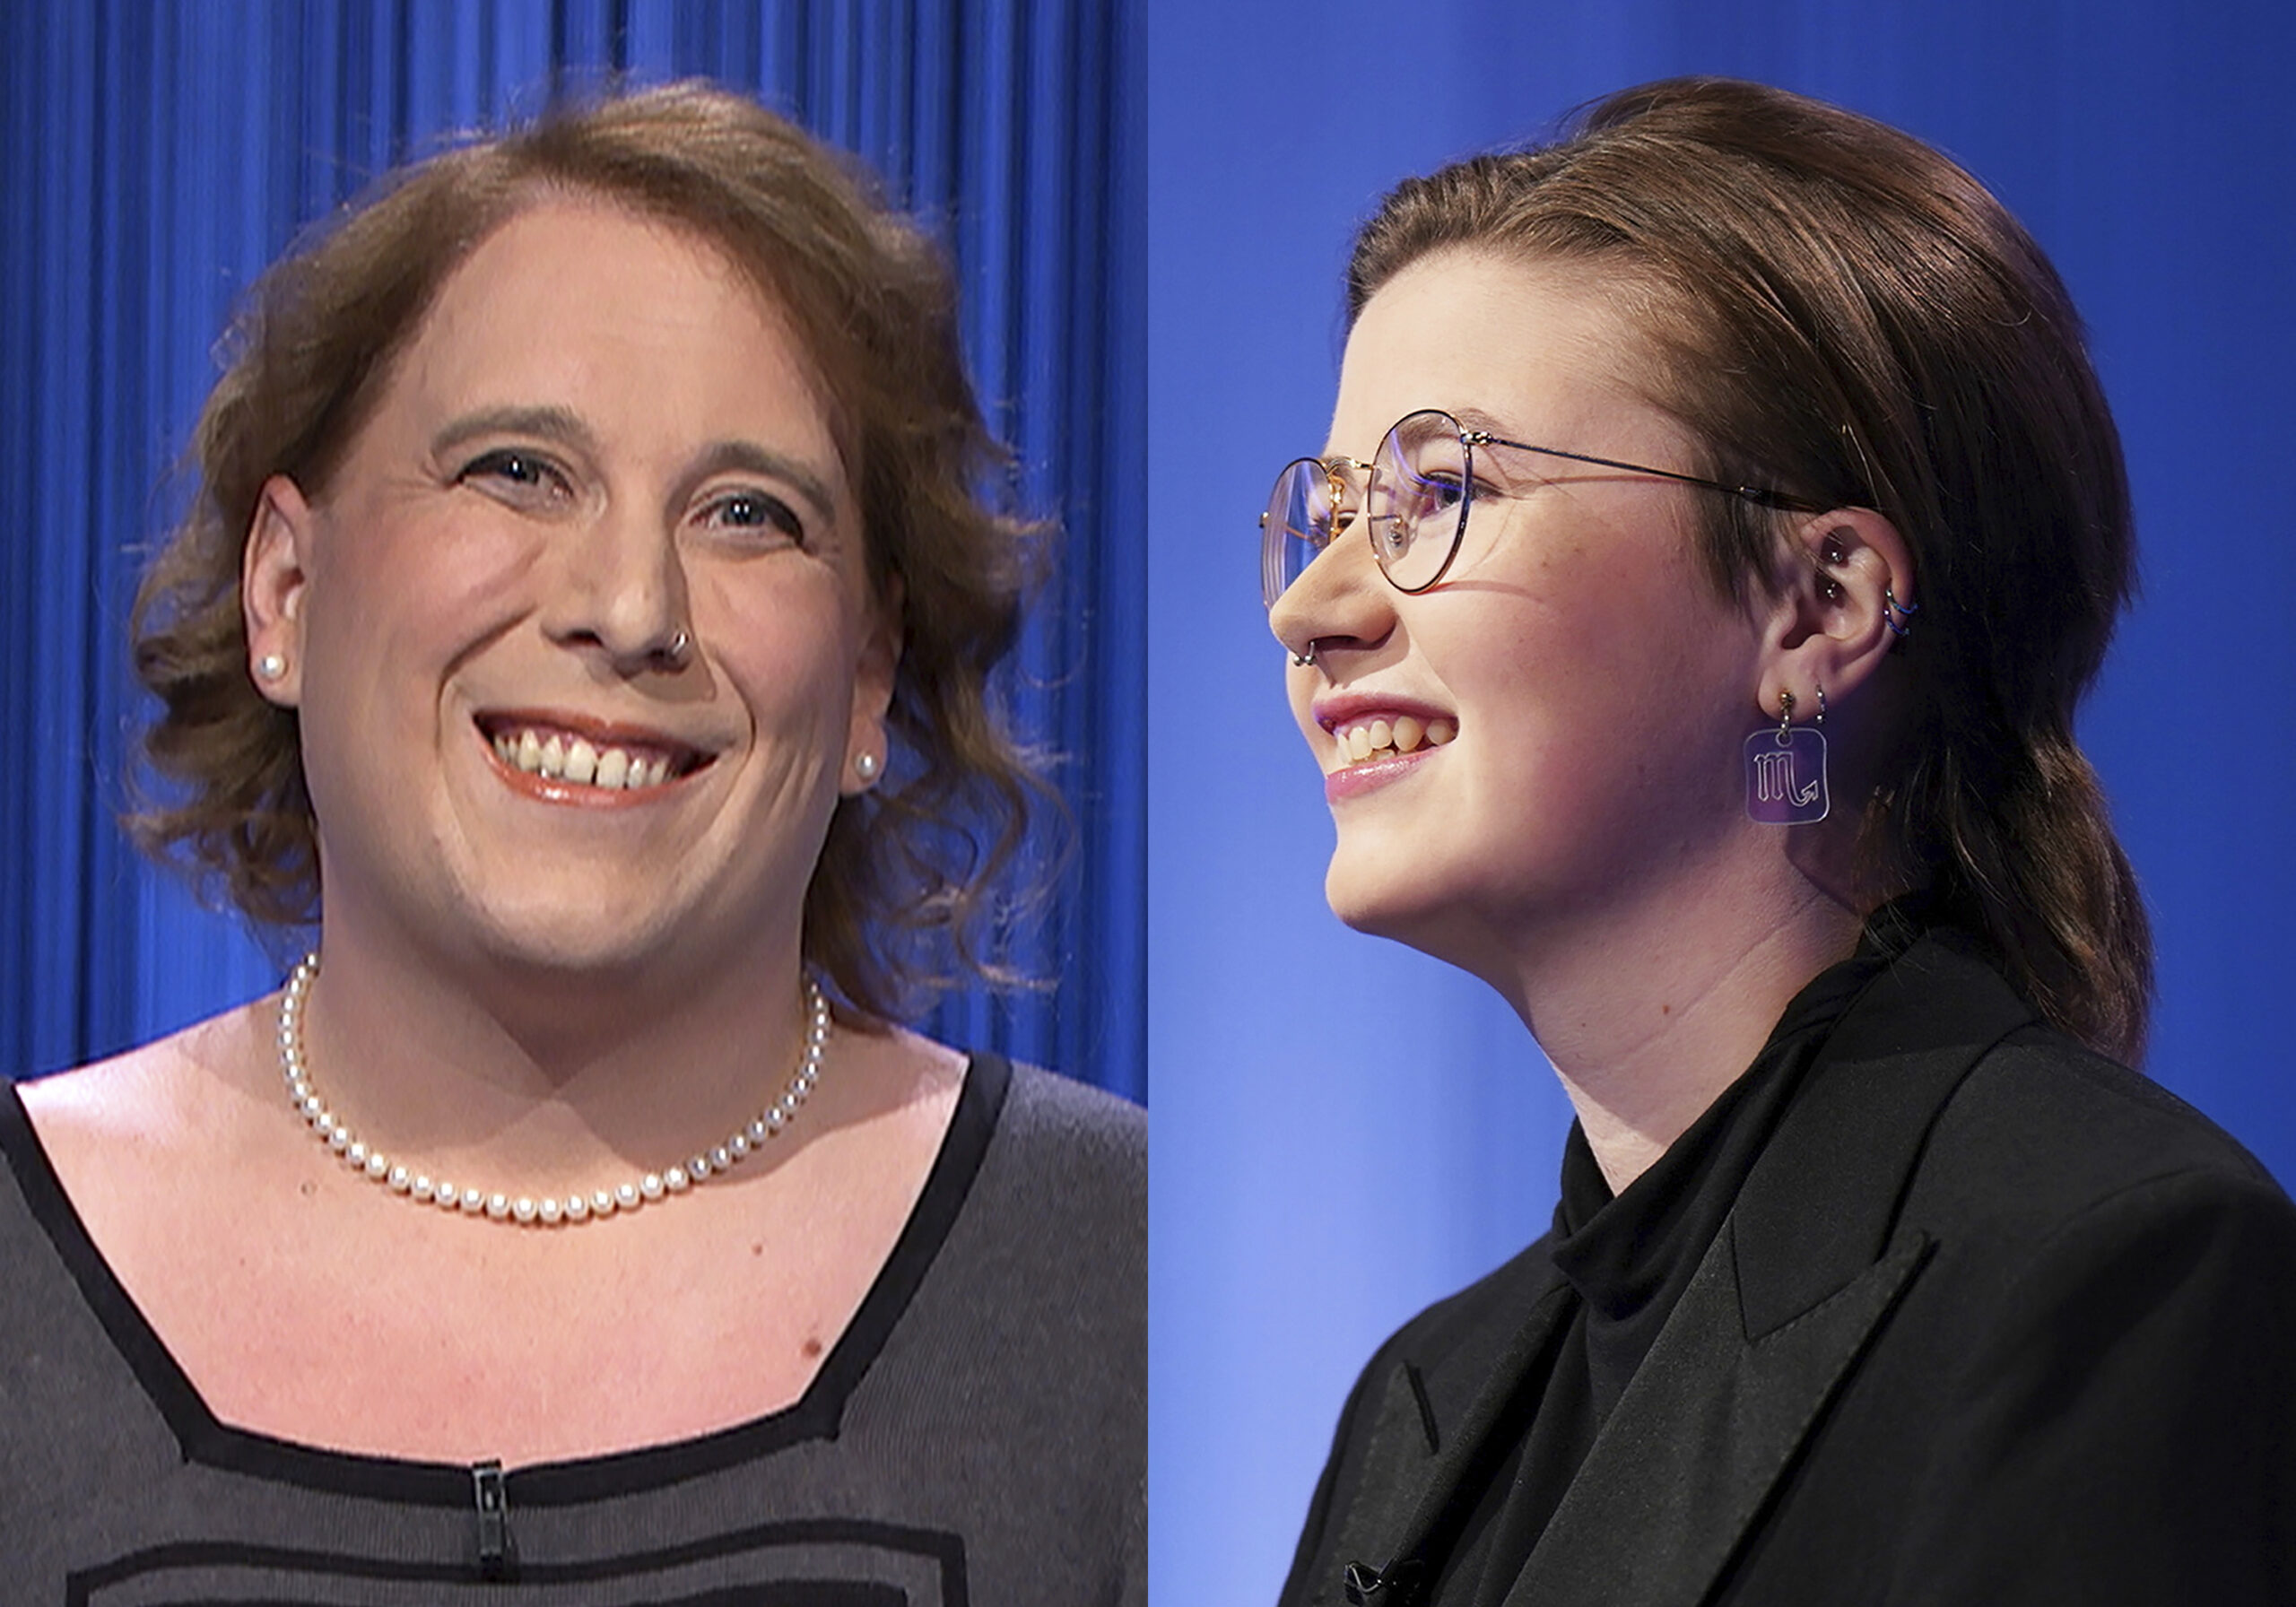 This combination of two separate photos shows contestants Amy Schneider, left, and Mattea Roach on "Jeopardy!" The game show has been enjoying an unusual run of super champs. Schneider and Roach were notable for their impressive breadth of knowledge, and they were rarely wrong. (Sony Pictures Entertainment via AP)